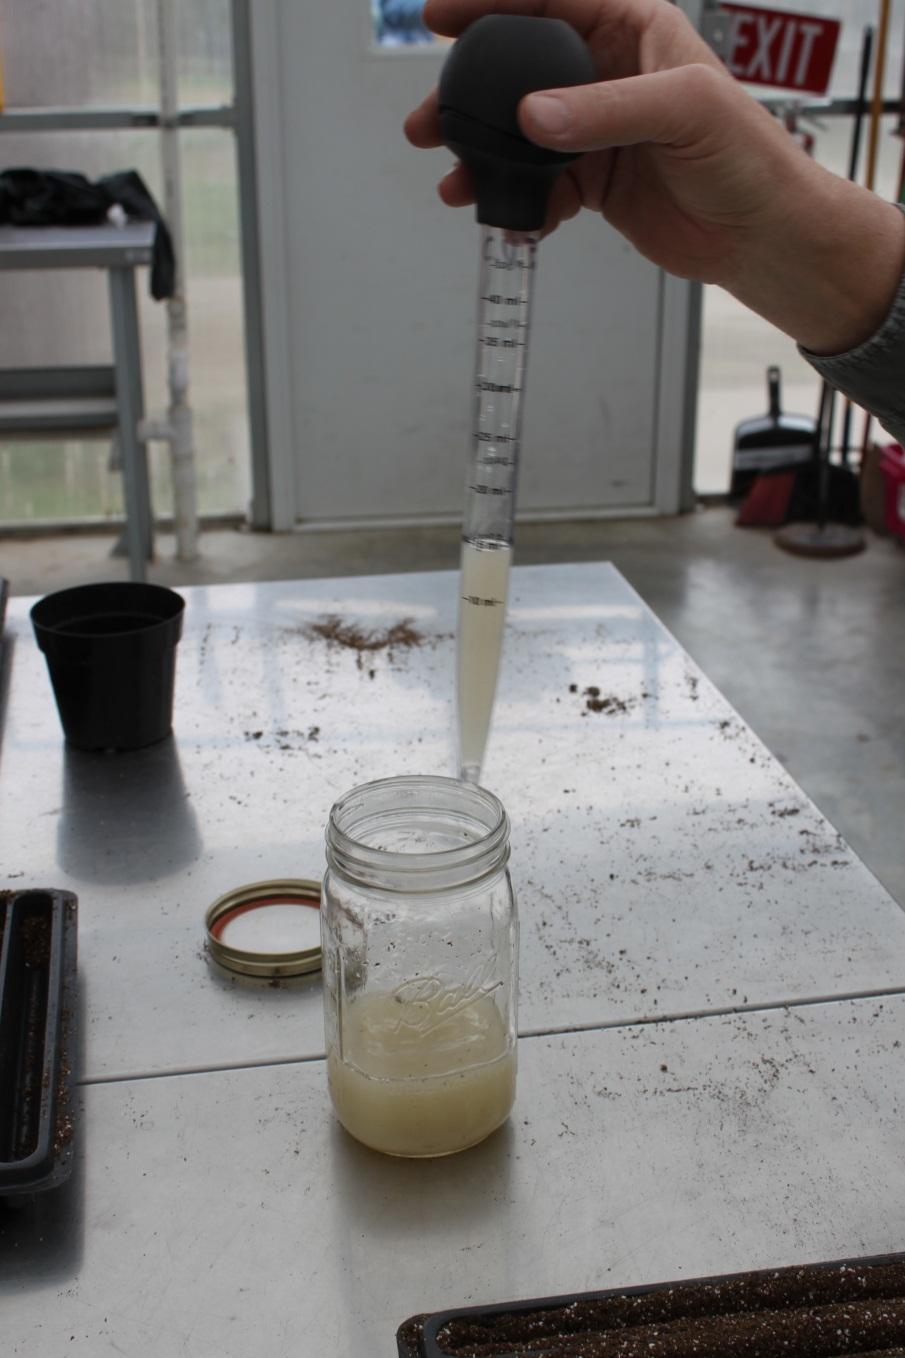 Materials and Methods ½ Tbsp of mycorrhizal fungi powder was added to ¾ quart of tap-water and mixed well.